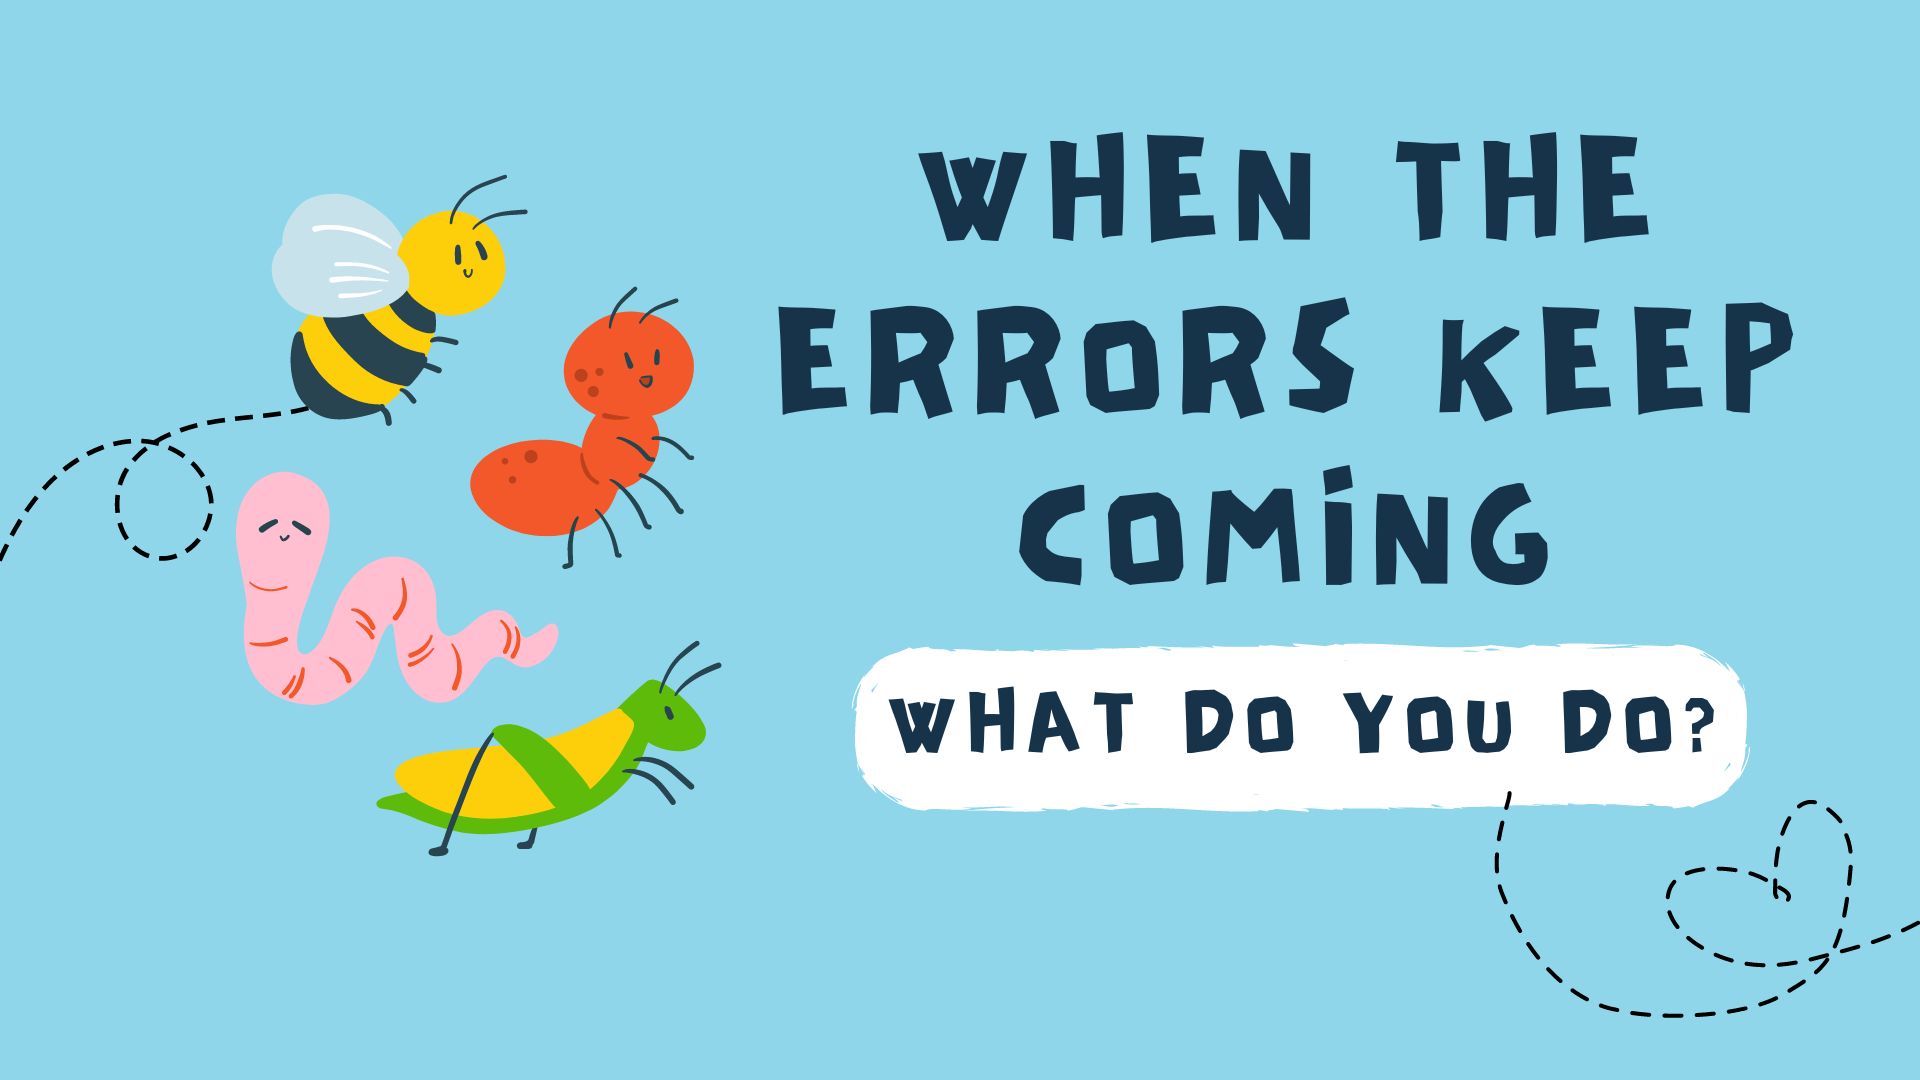 When the errors keep coming, what do you do?